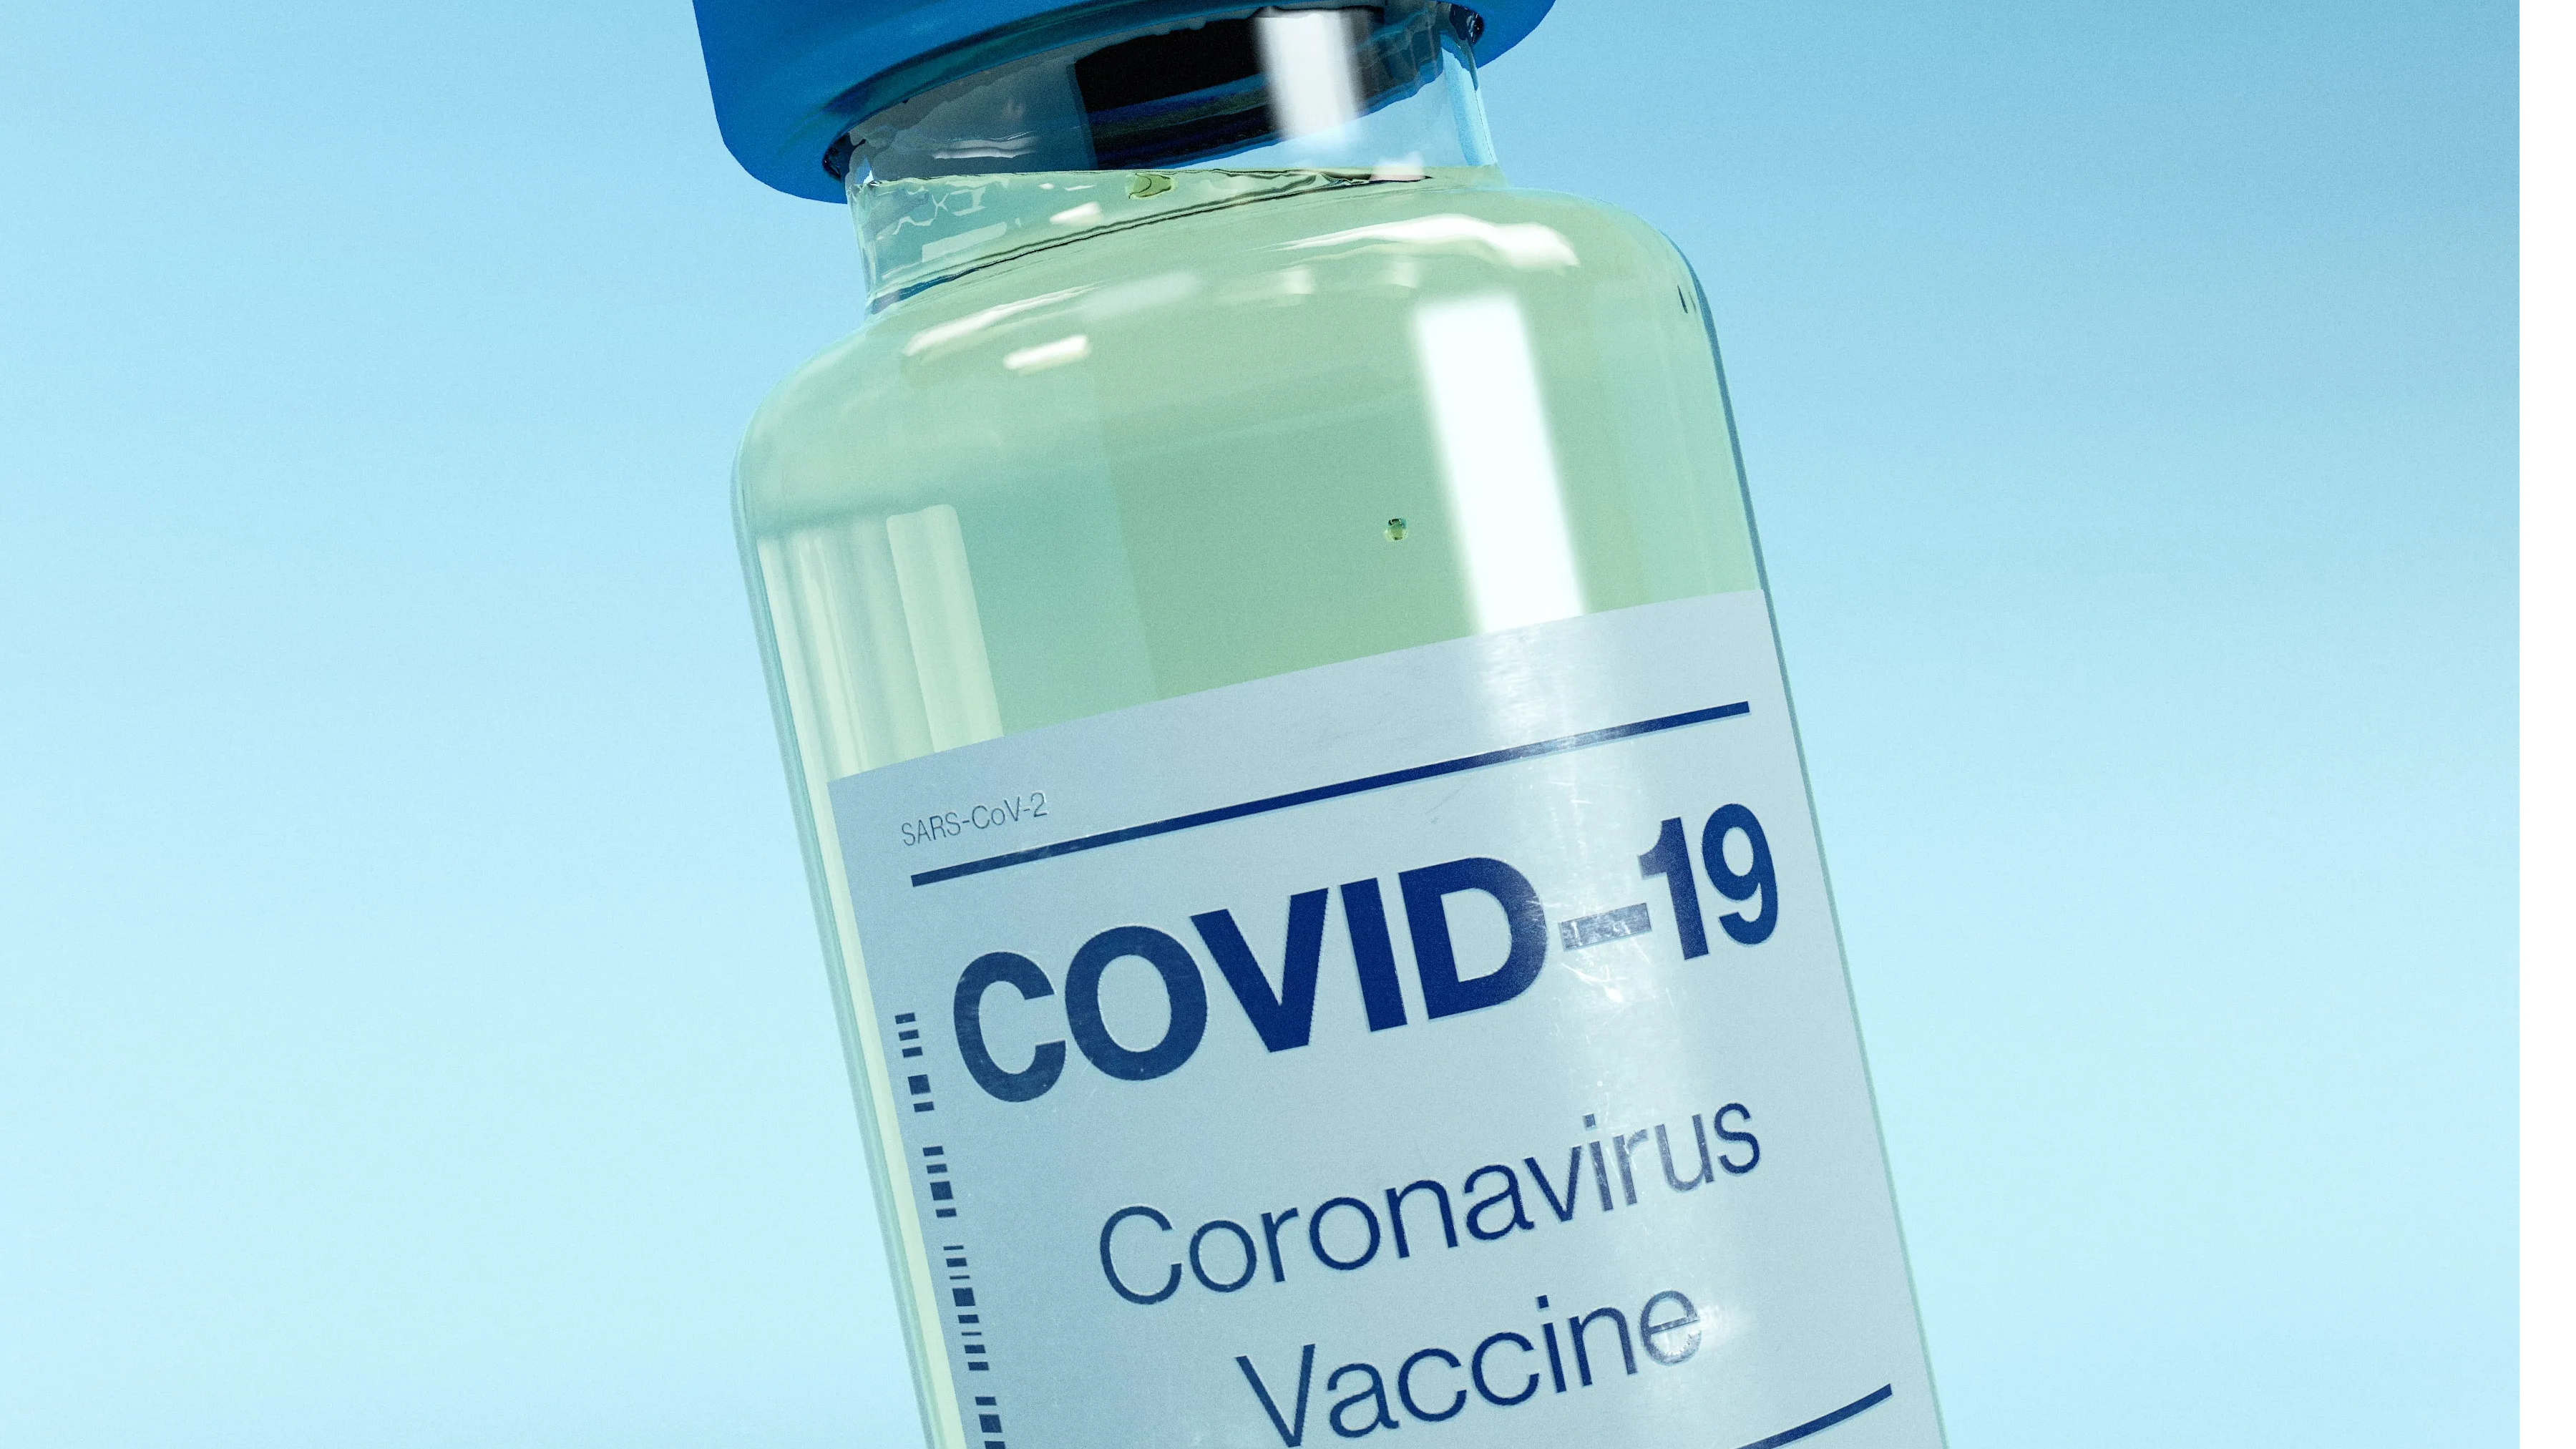 COVID-19 vaccination in Europe to start from December 27